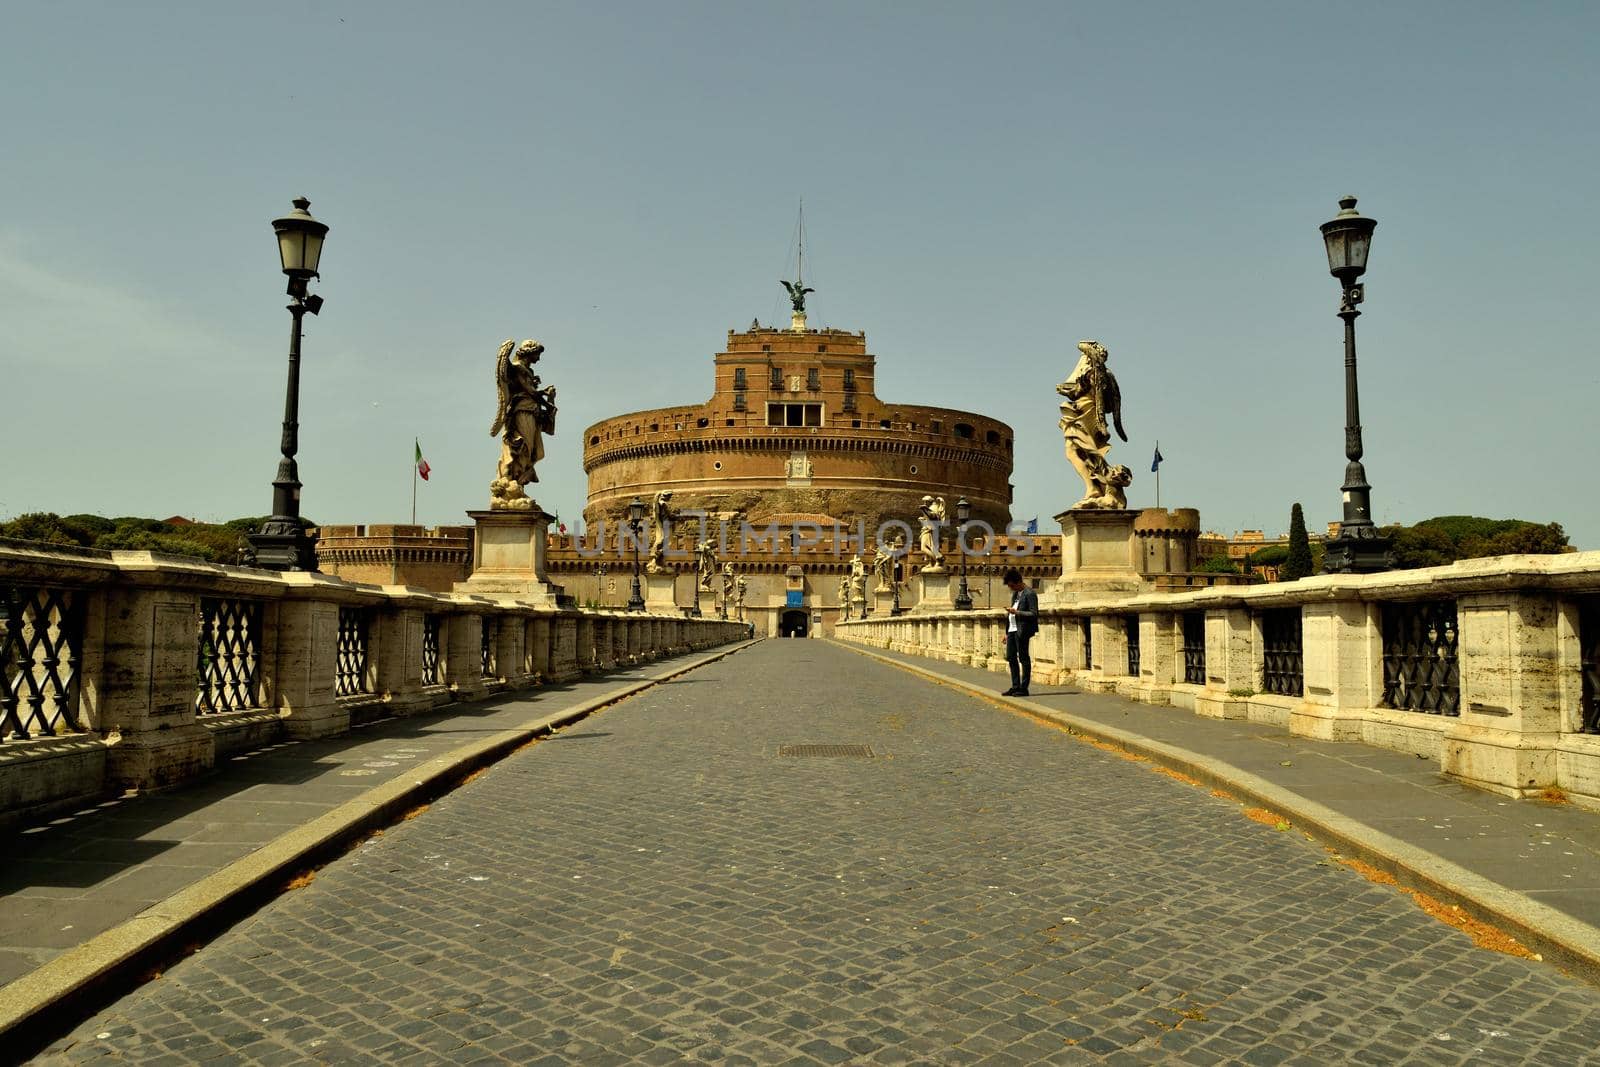 View of the Castel Sant'Angelo closed without tourists due to phase 2 of the lockdown by silentstock639